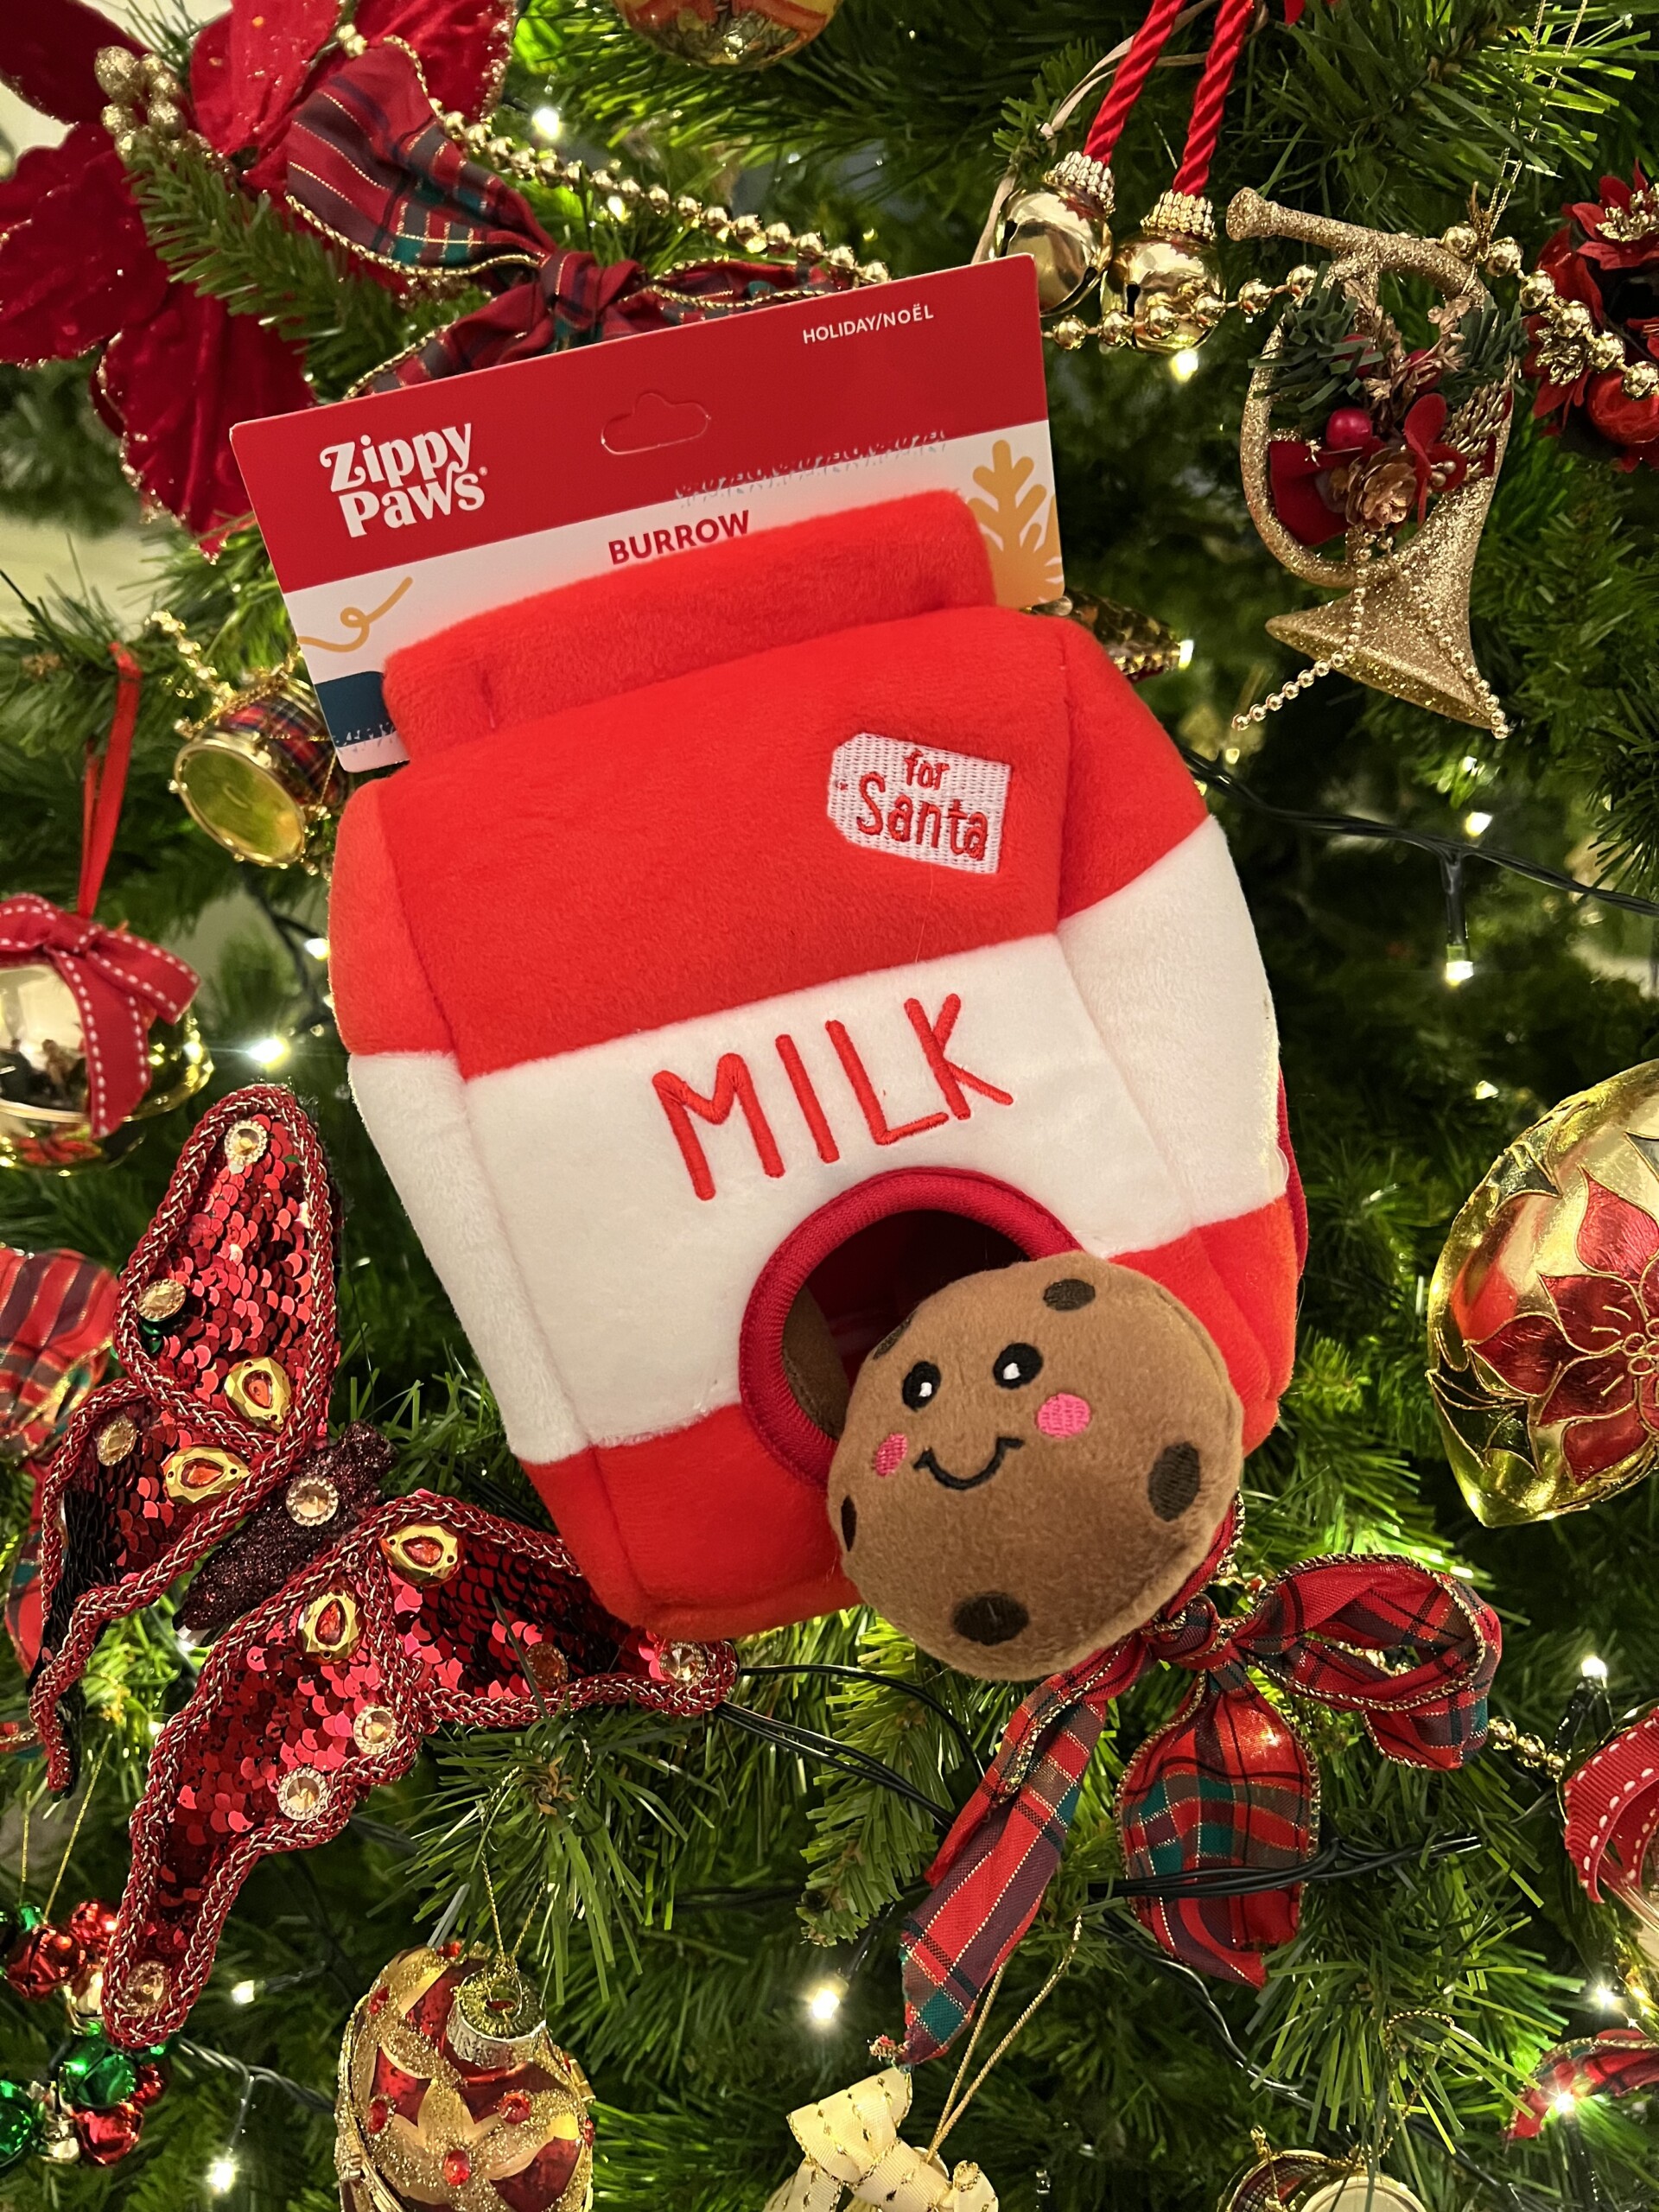 A christmas burrow toy for dogs, featuring a toy cookie inside a carton of milk for santa paws, is held in front of a decorated christmas tree.